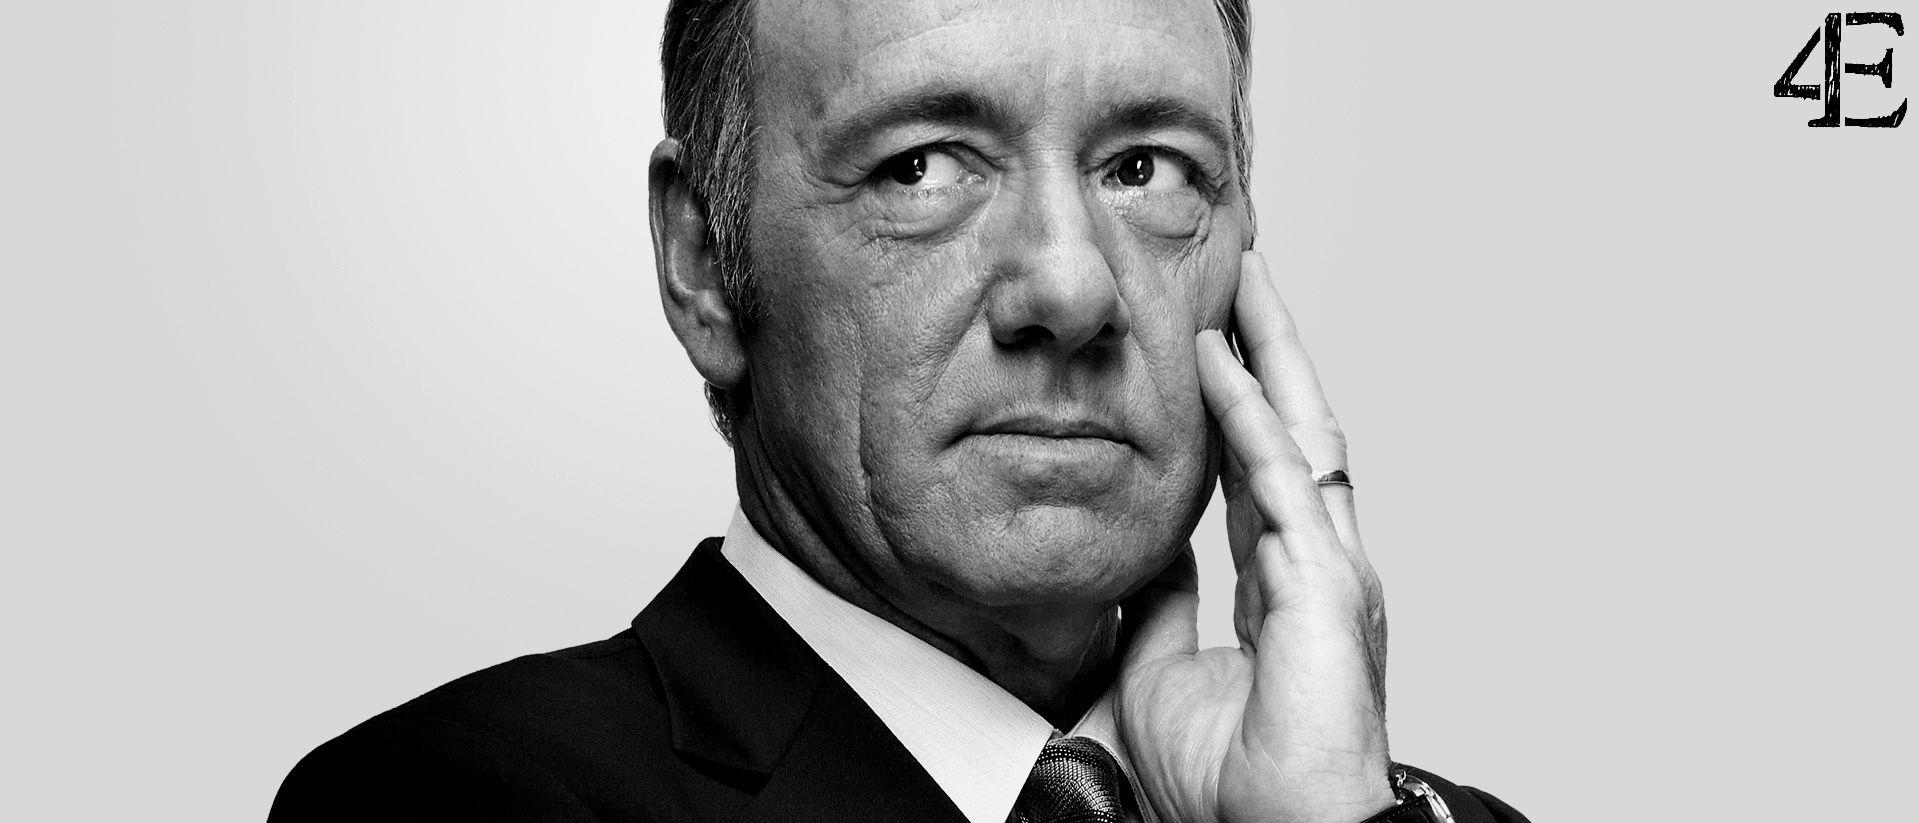 Badass House Of Cards Quotes That You Can Use Everyday